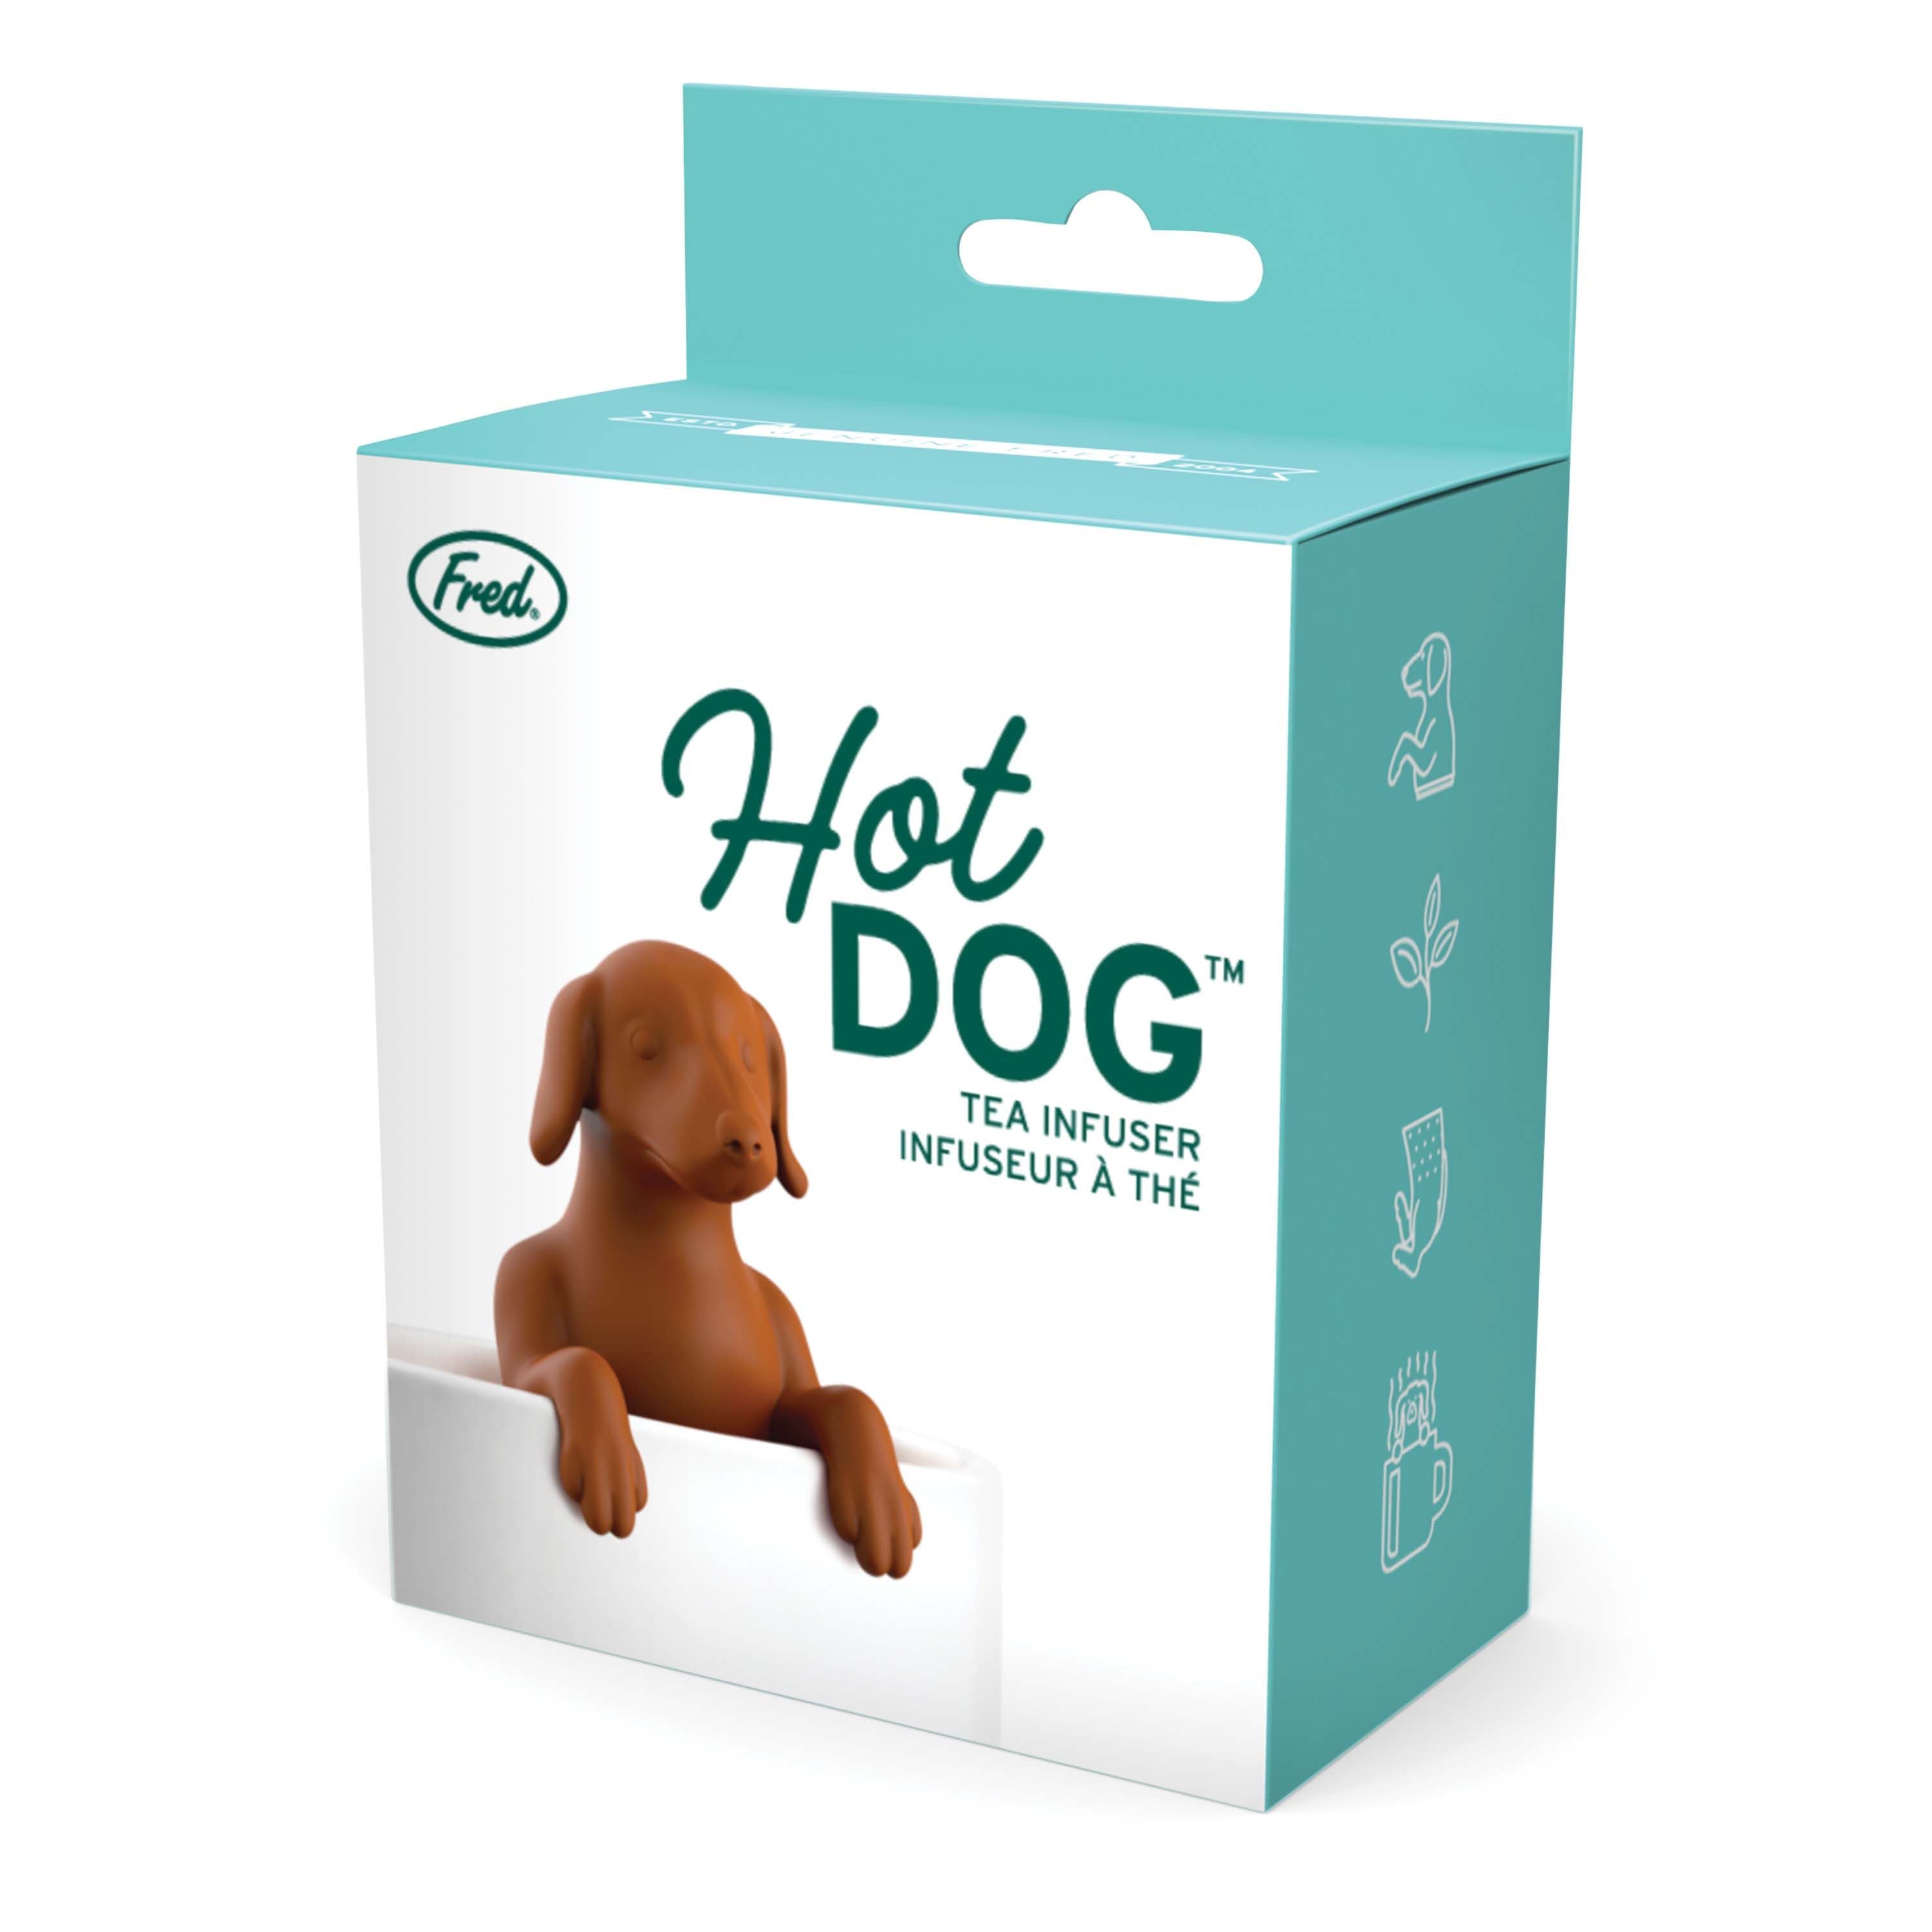 Fred Hot Dog - Dog Tea Infuser-Fun & Games-Fred-The Bay Room